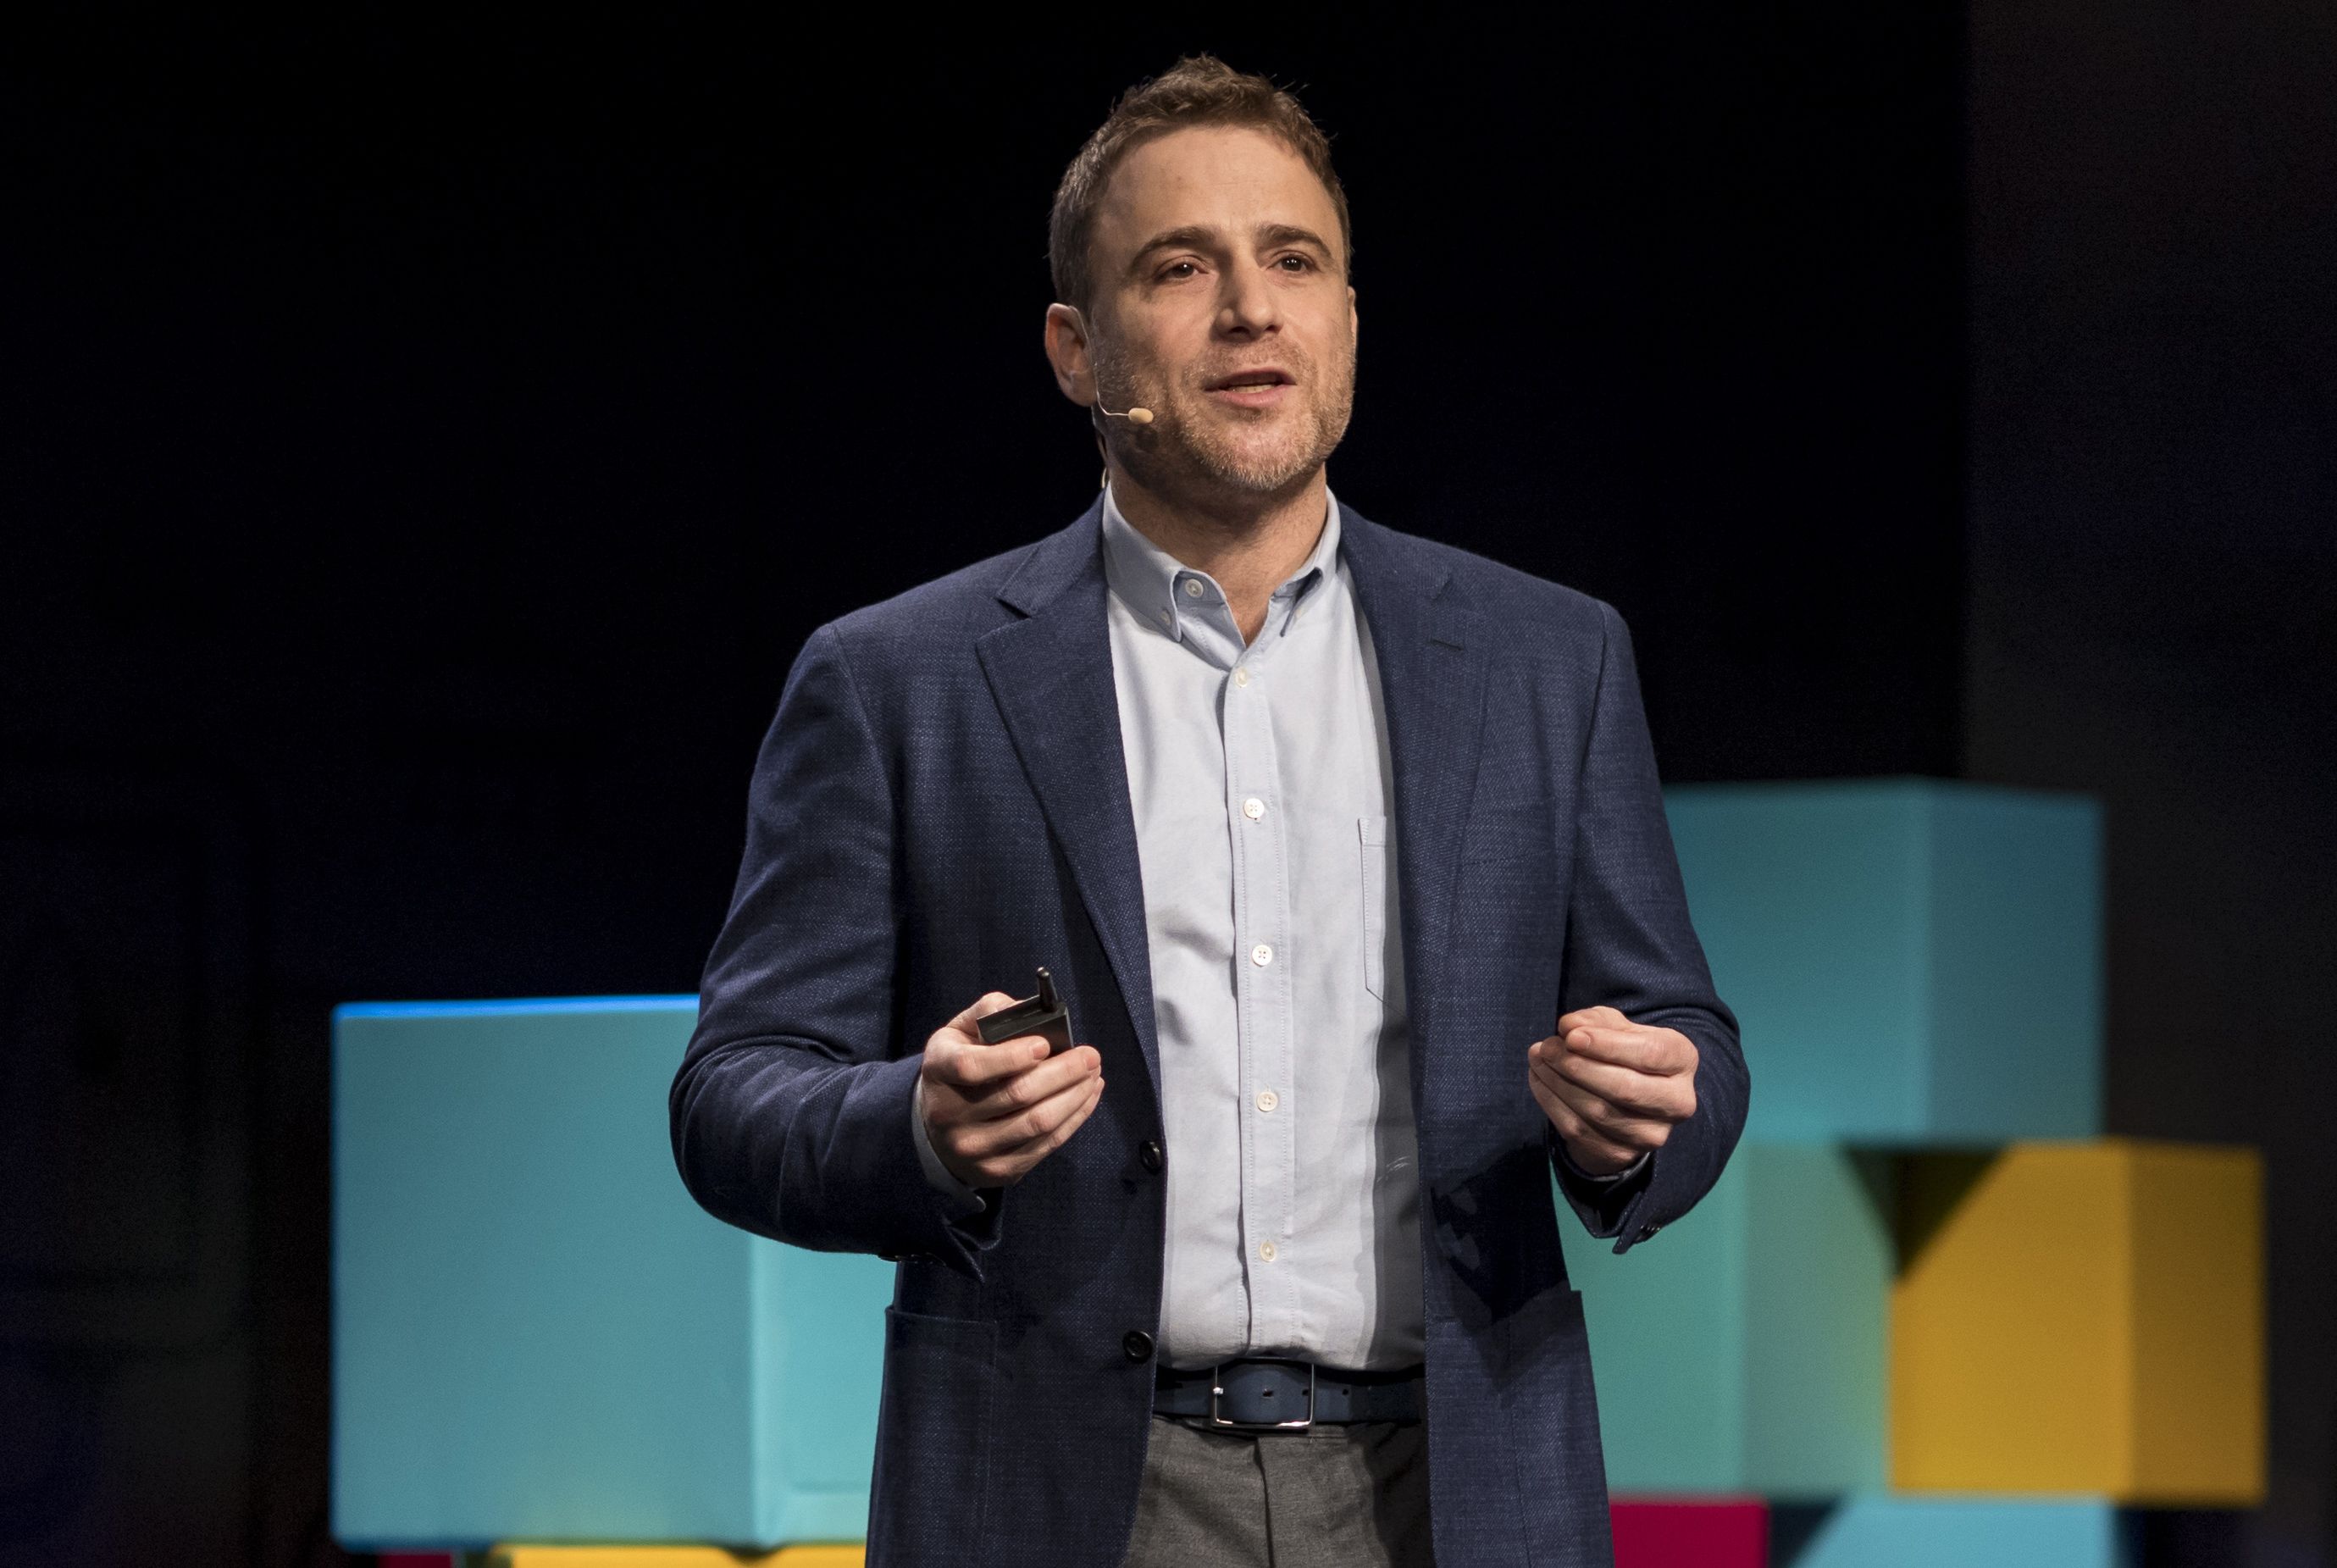 Stewart Butterfield, co-founder and chief executive officer of Slack Technologies Inc., speaks during an event in San Francisco, California.